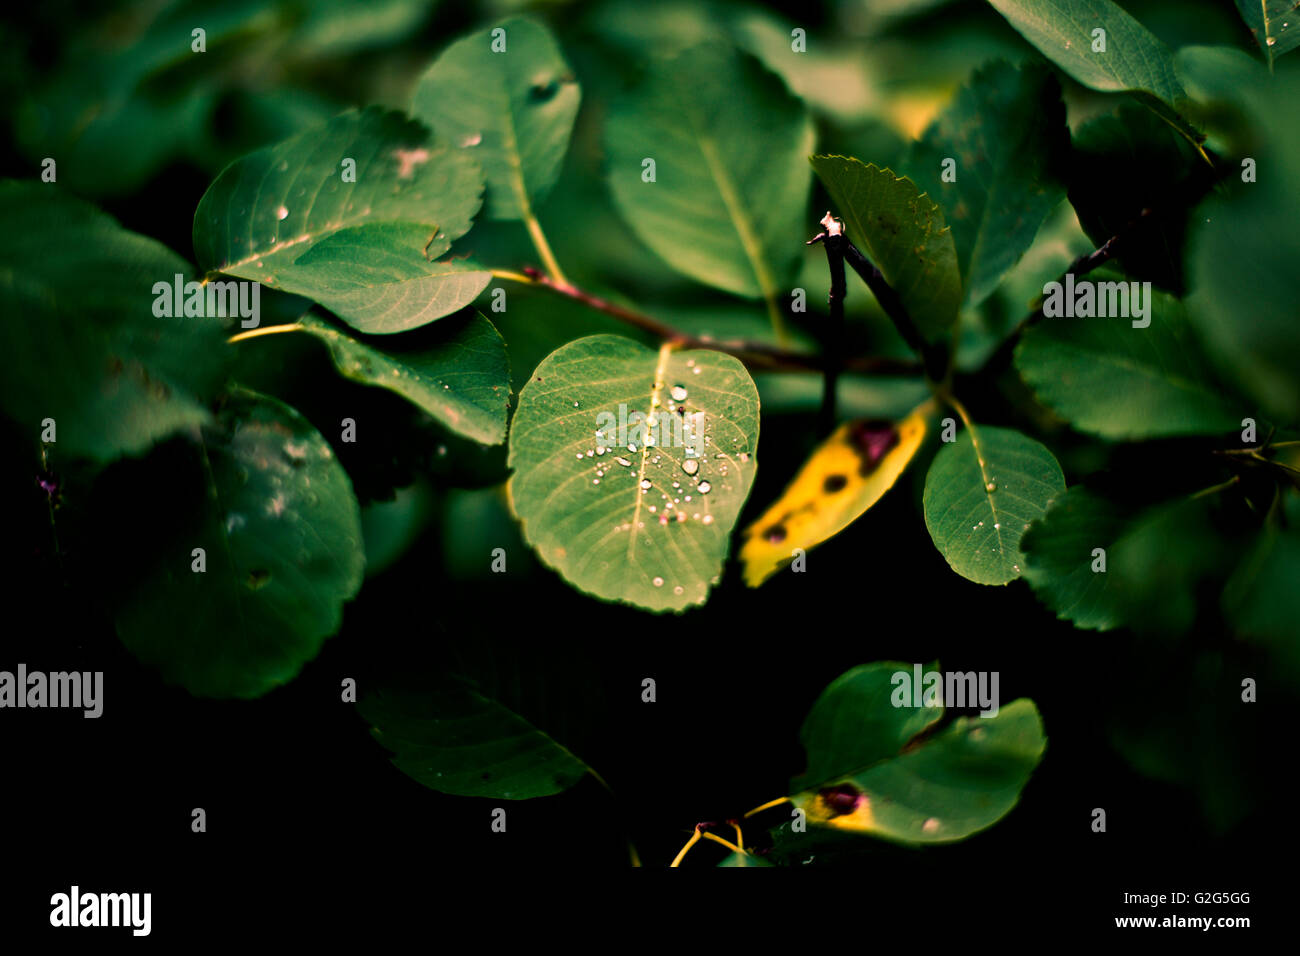 Waterdrops on Leaves Stock Photo